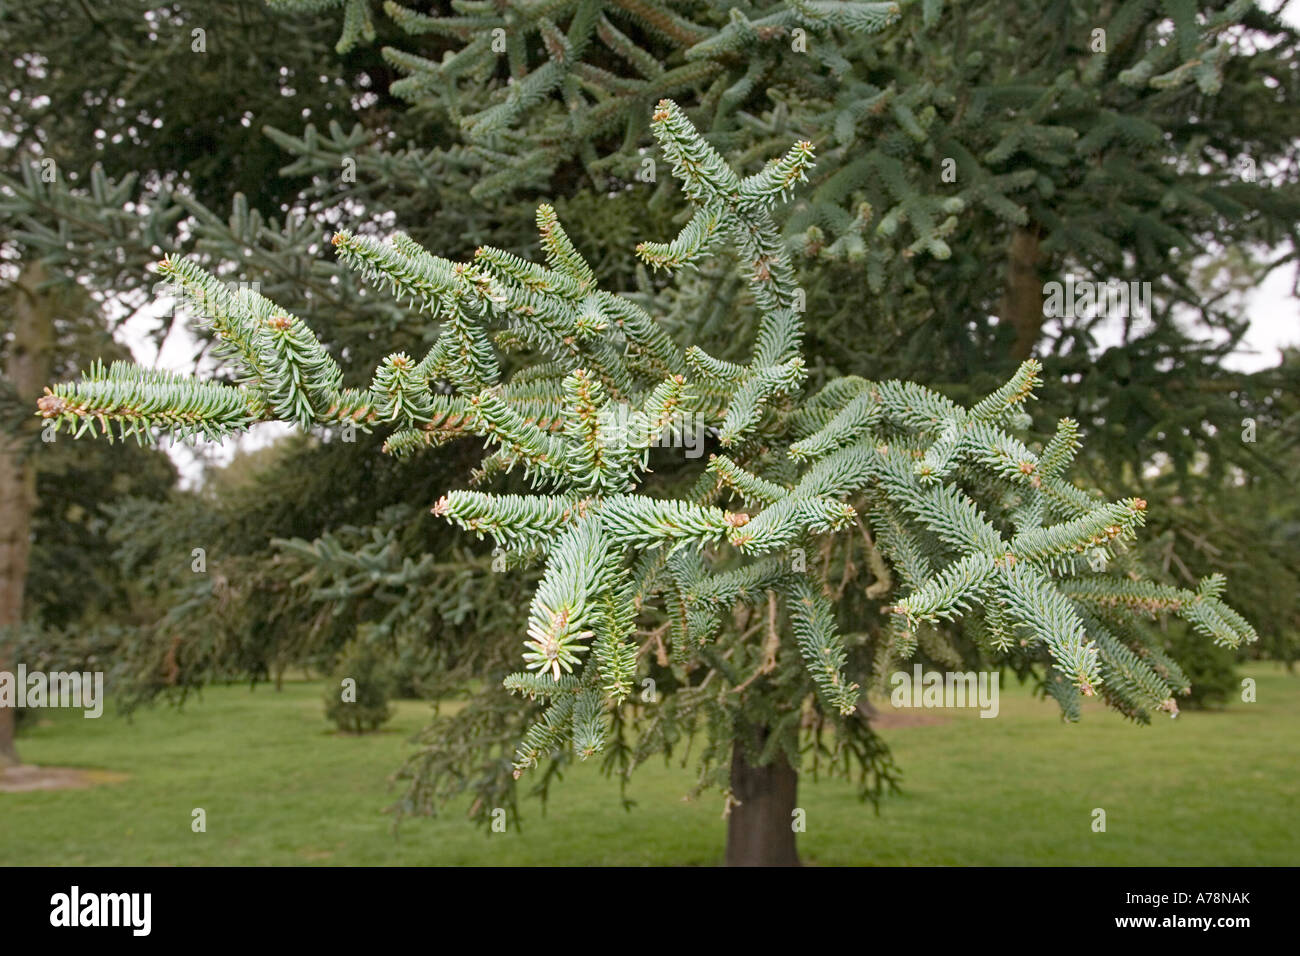 Branches and leaves of Spanish fir Abies pinsapo Christchurch Botanical Gardens New Zealand Stock Photo